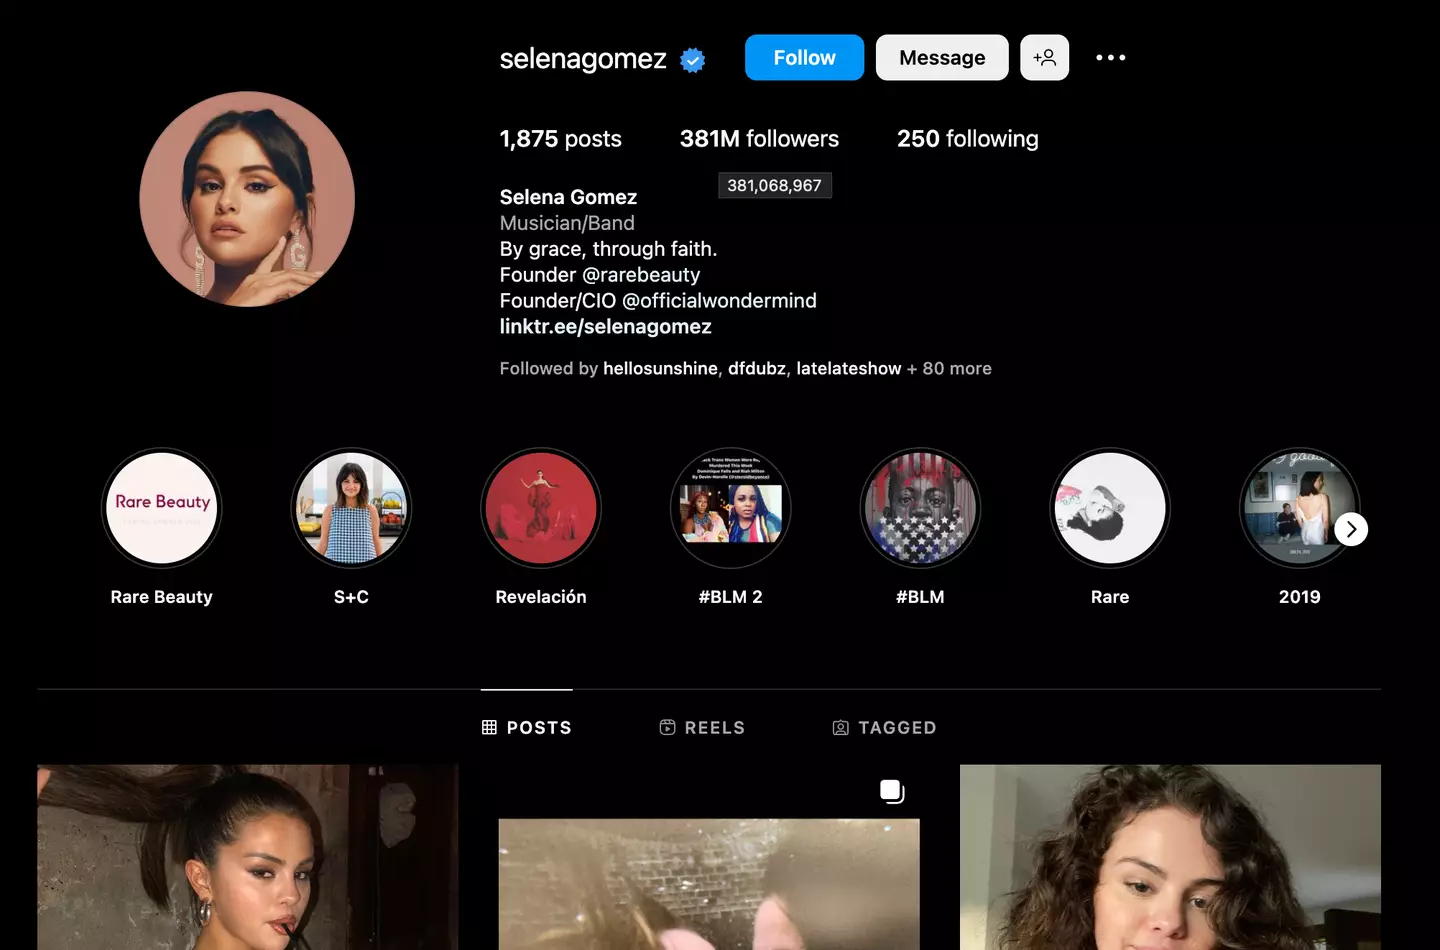 Selena Gomez is Instagram's current most-followed woman.